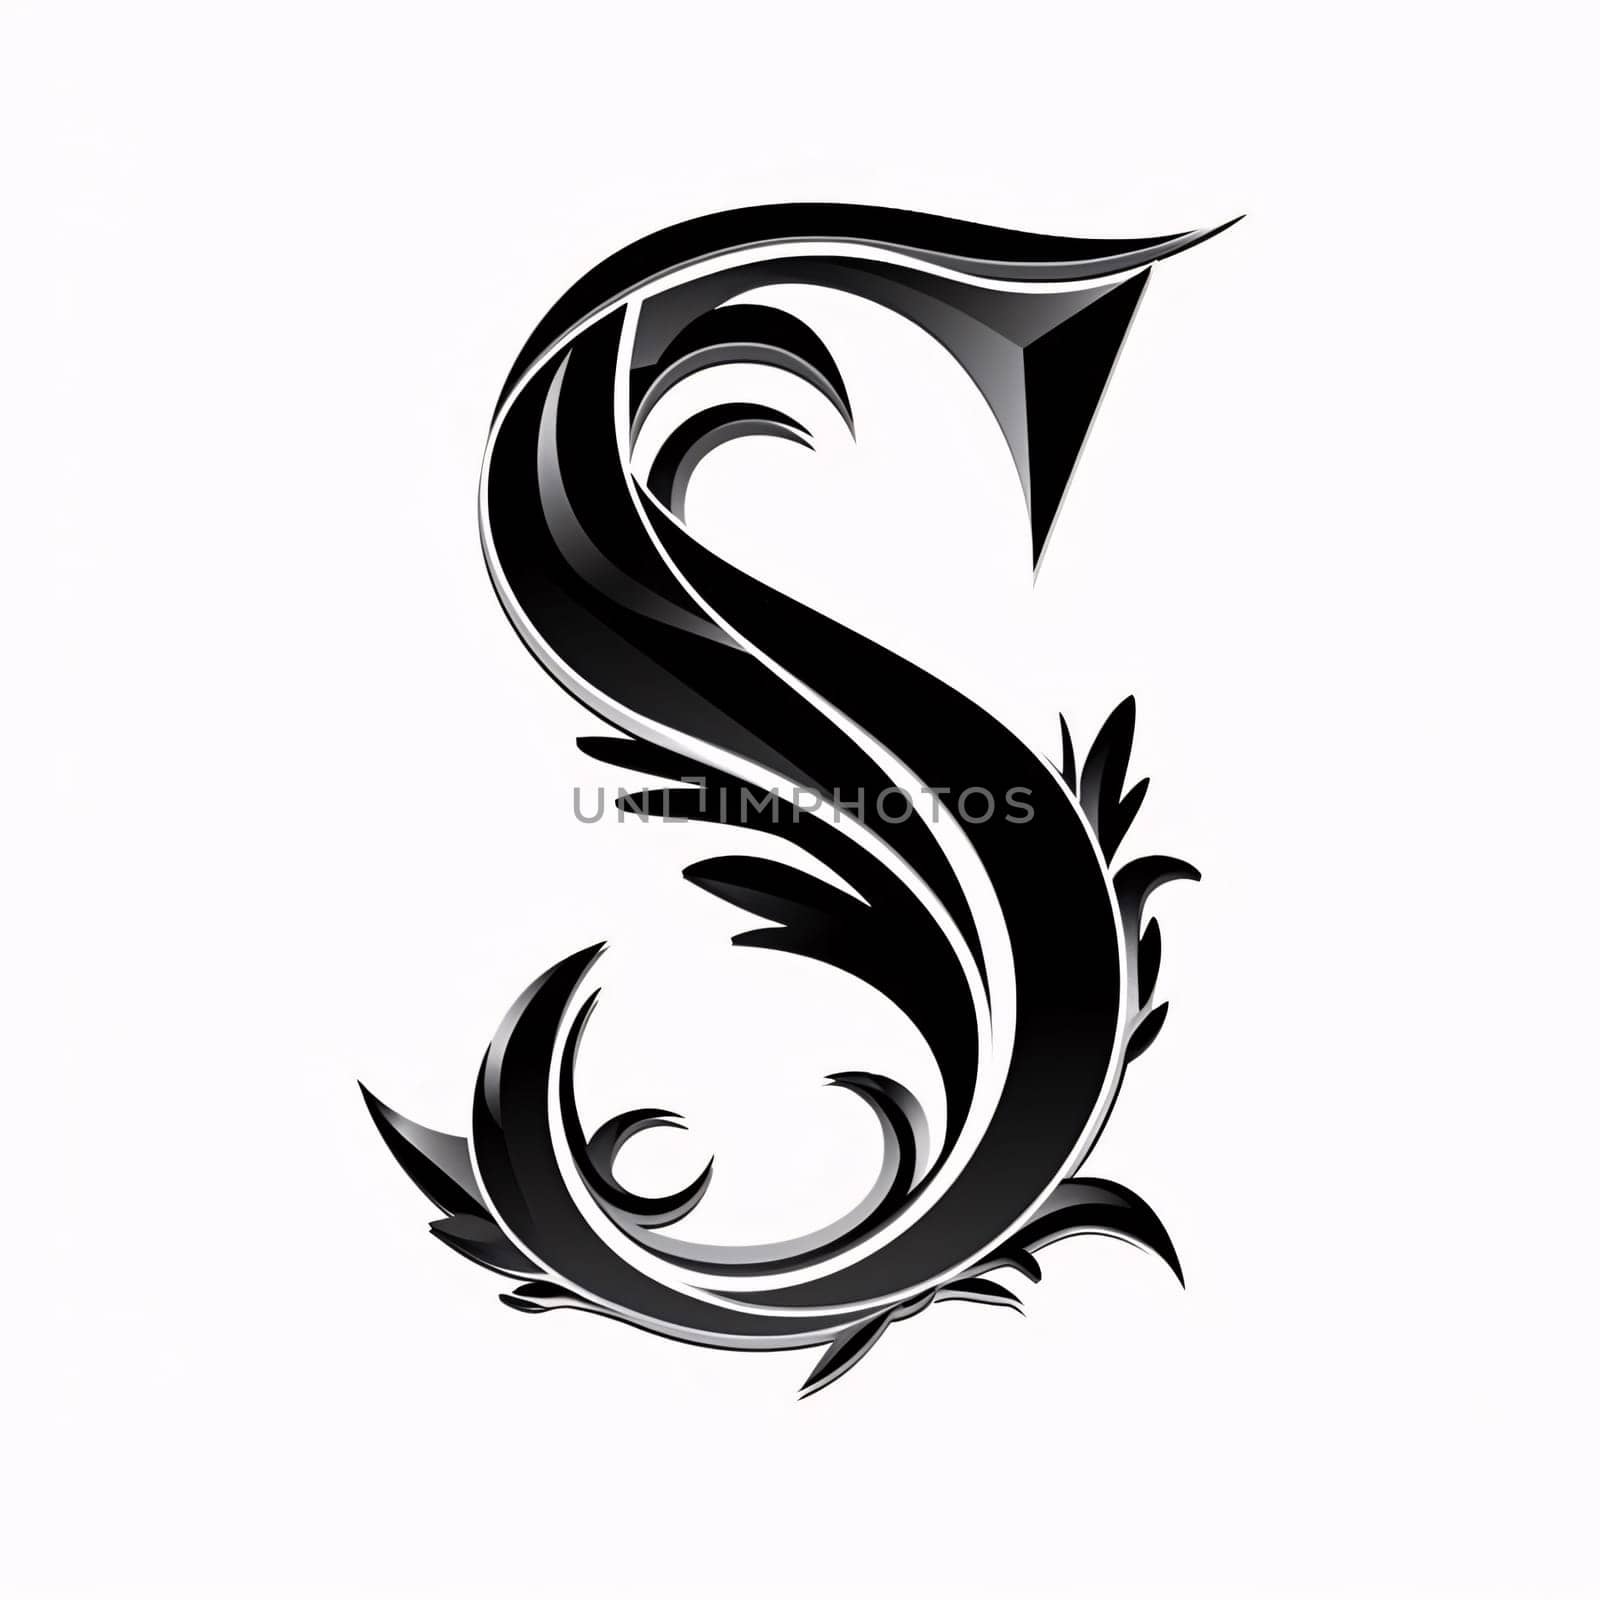 decorative letter S in black and silver colors on a white background by ThemesS